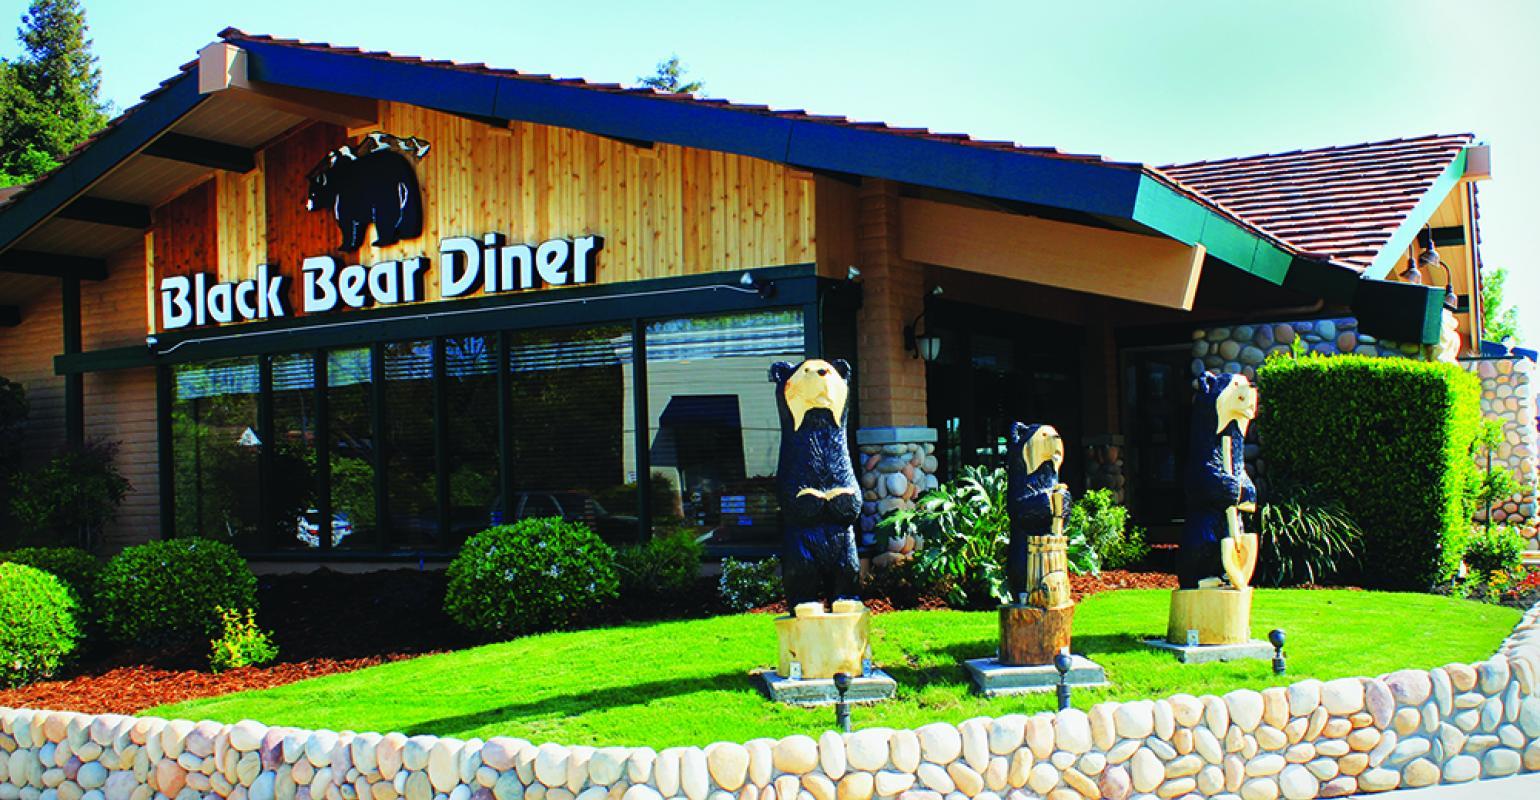 Black Bear Diner menu prices featuring 126 items ranging from $1.00 to $15.99